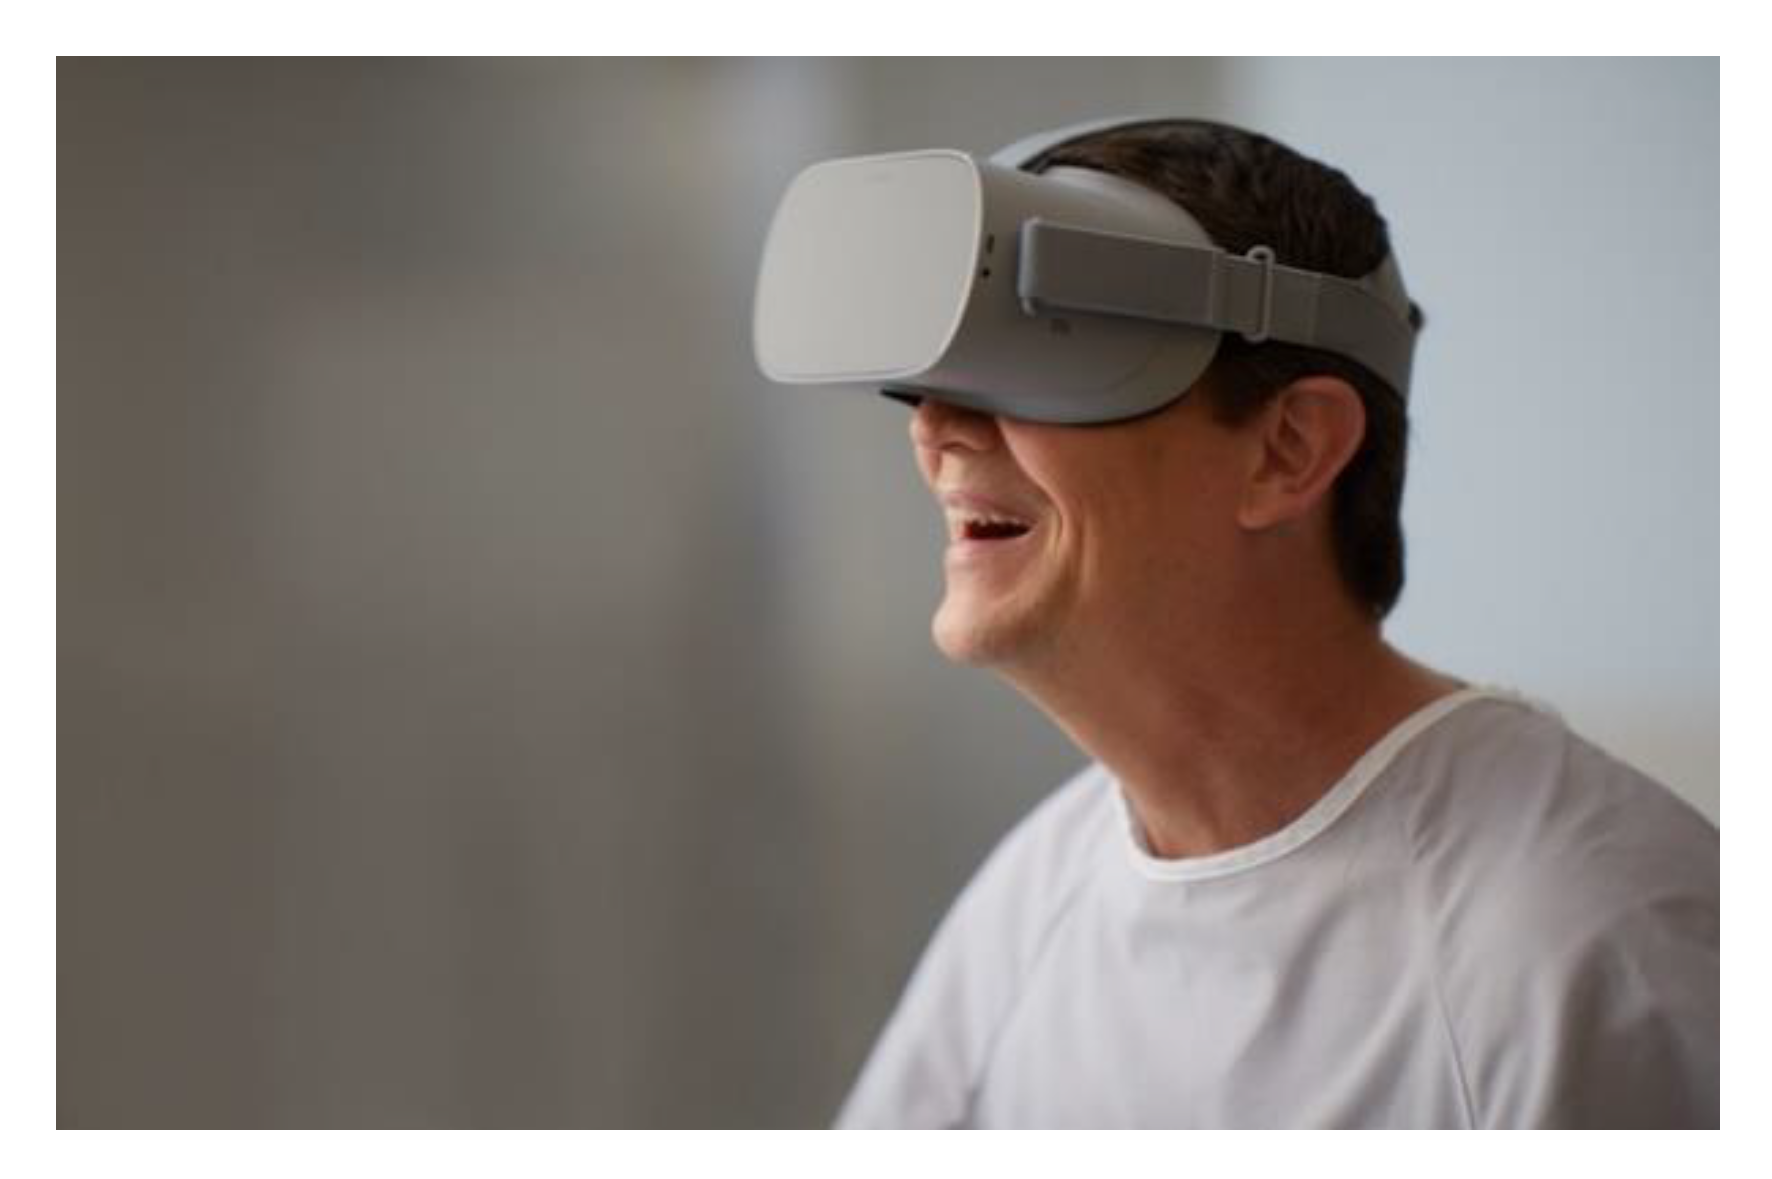 Informatics | Free Full-Text | Use of Virtual Reality to Reduce Anxiety and Pain of Adults Undergoing Outpatient Procedures